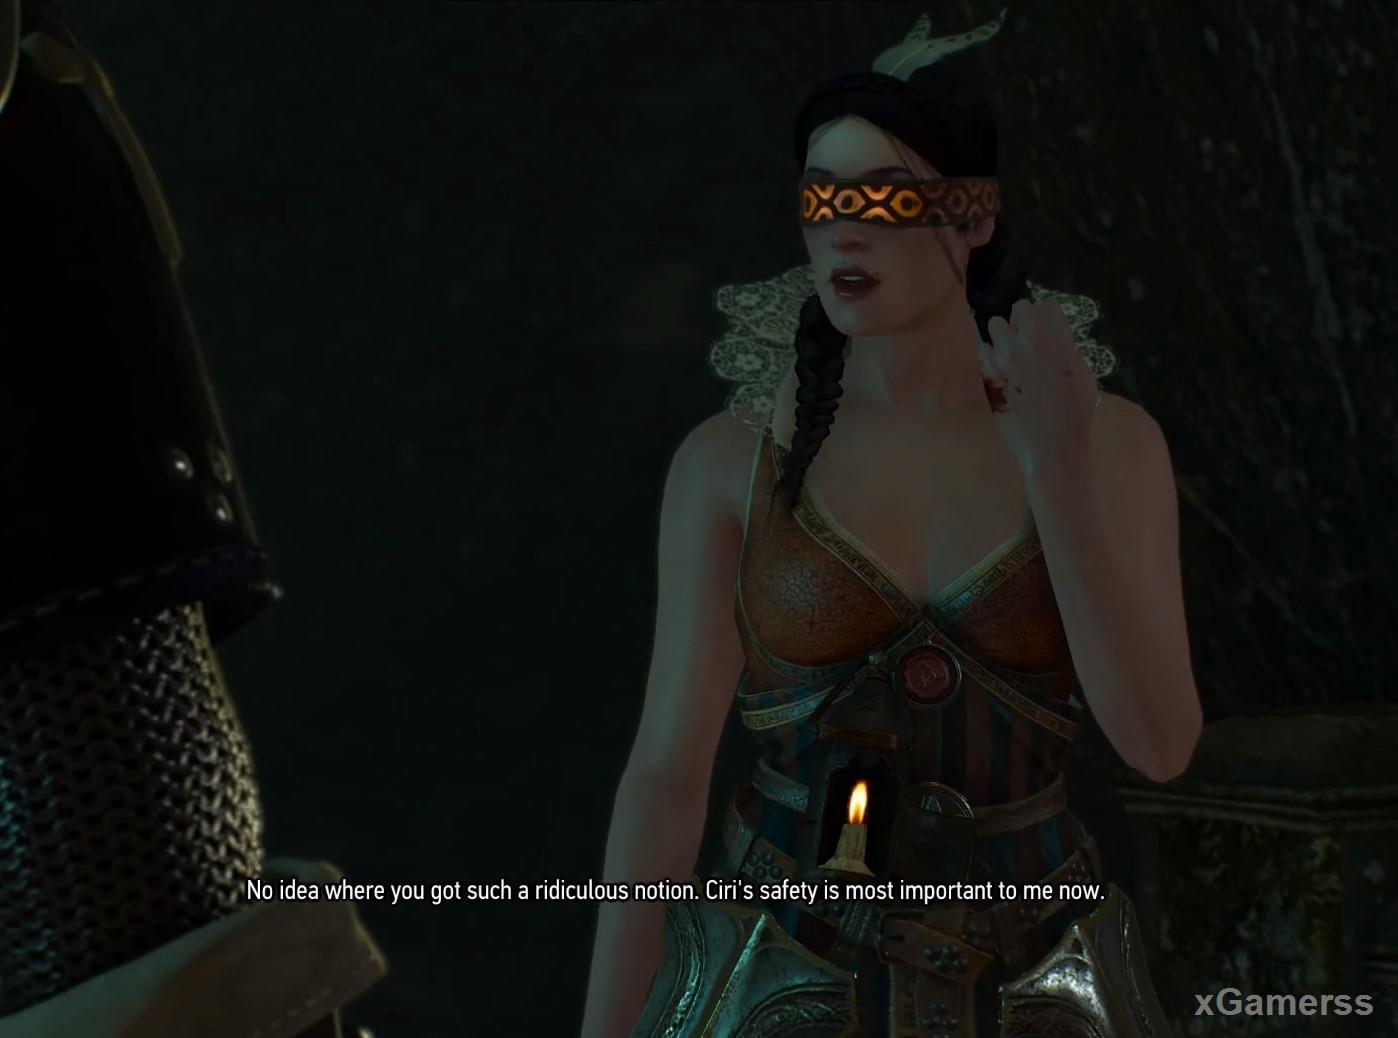 Complete the search with a small dialogue with the sorceress